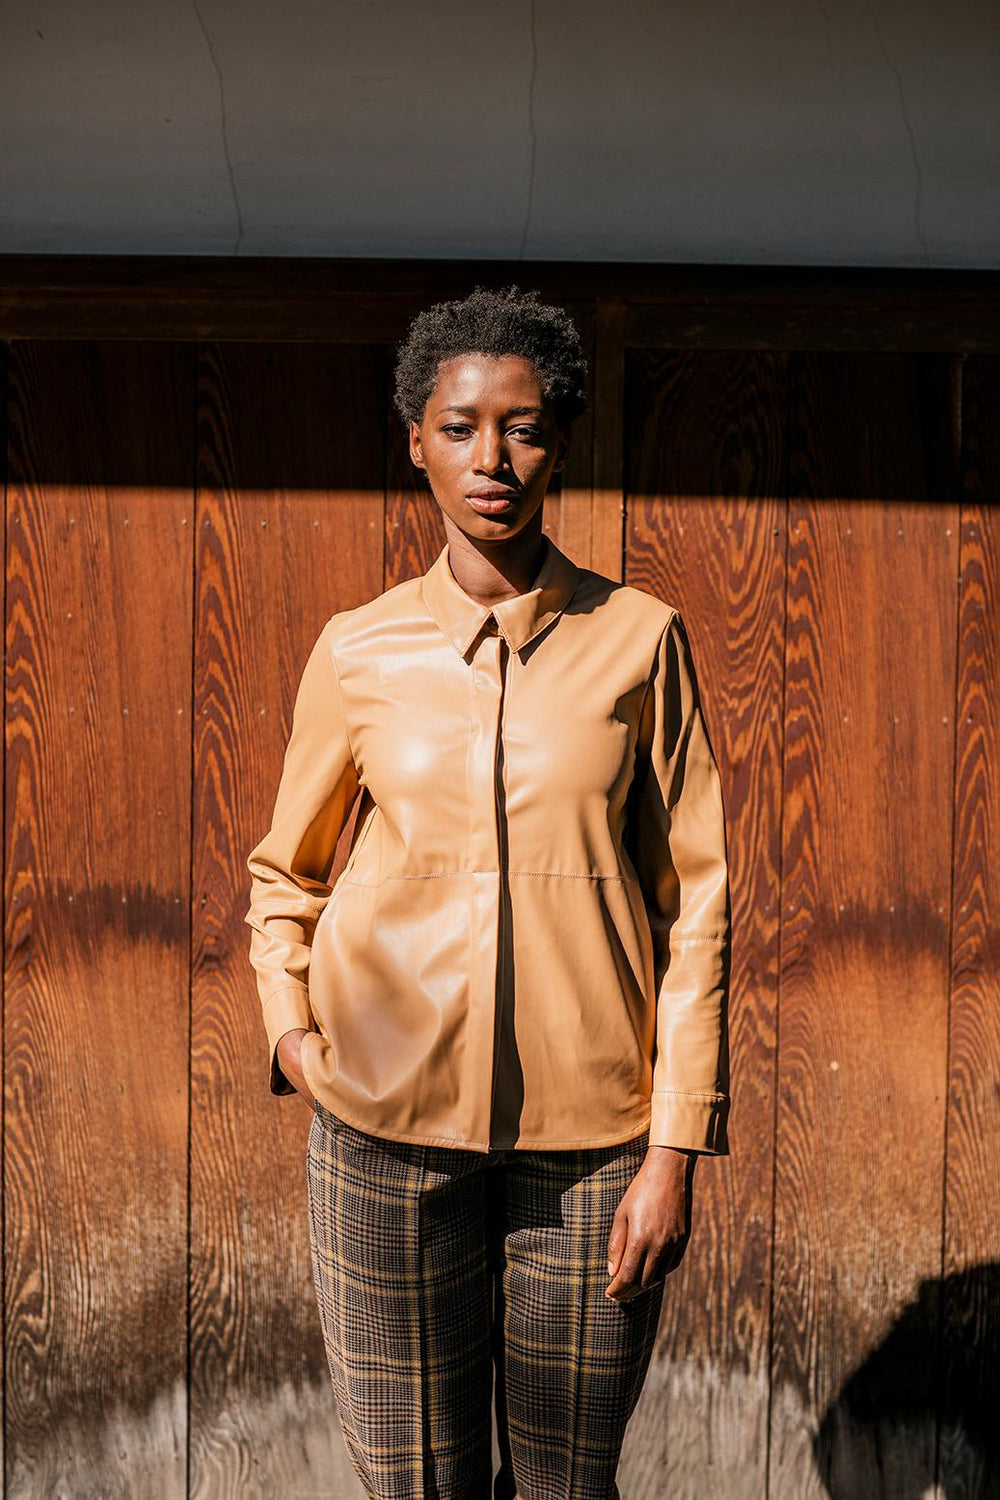 Woman wearing the Isra Shirt sewing pattern from Fibre Mood on The Fold Line. A shirt pattern made in leather(ette), suede(tte), denim, poplin, linen or Tencel fabrics, featuring a minimalistic cut, hidden button placket, straight set in sleeves, collar a